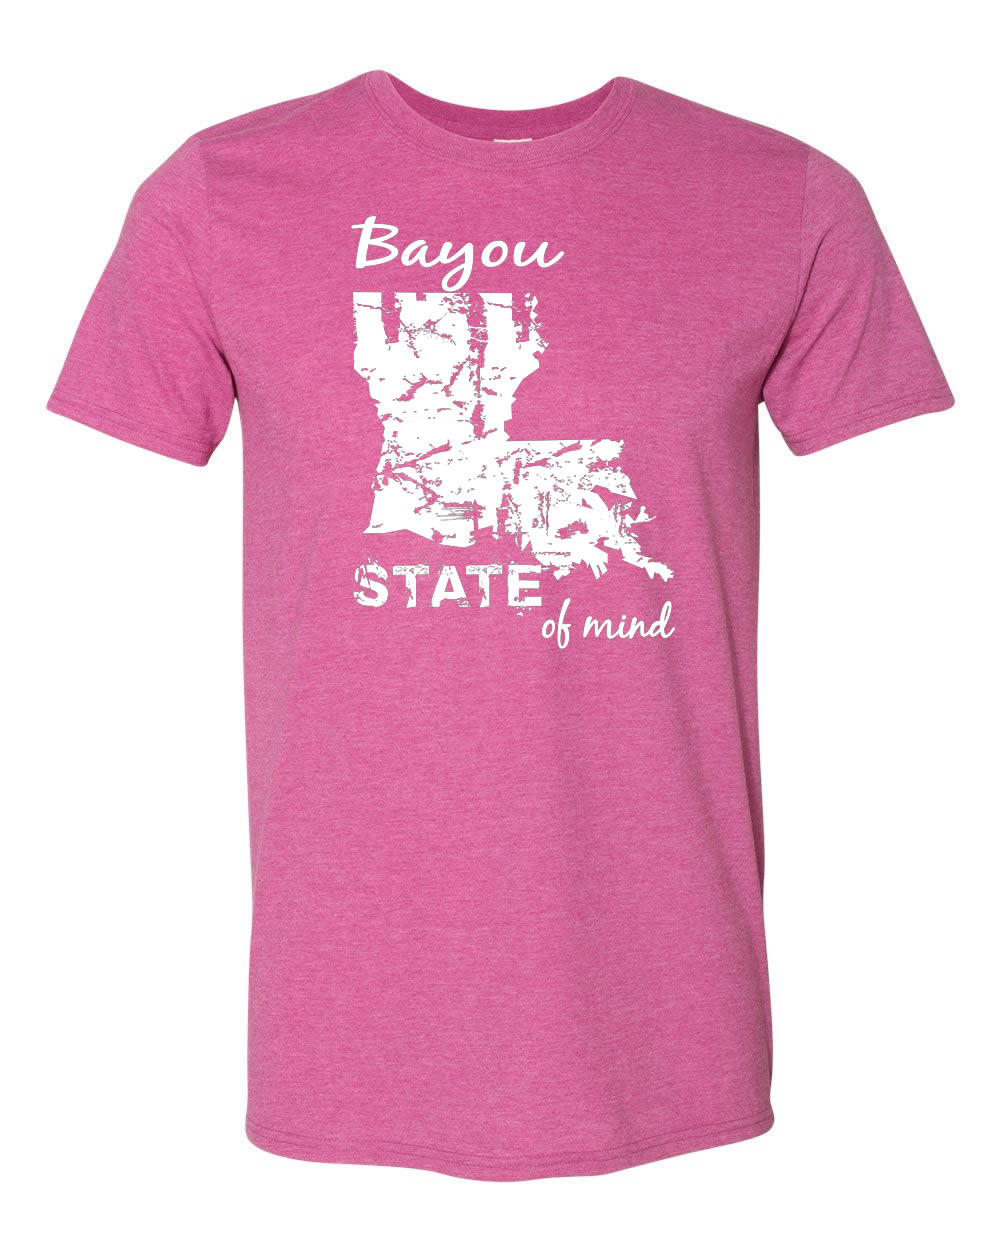 Berry: Bayou State of Mind